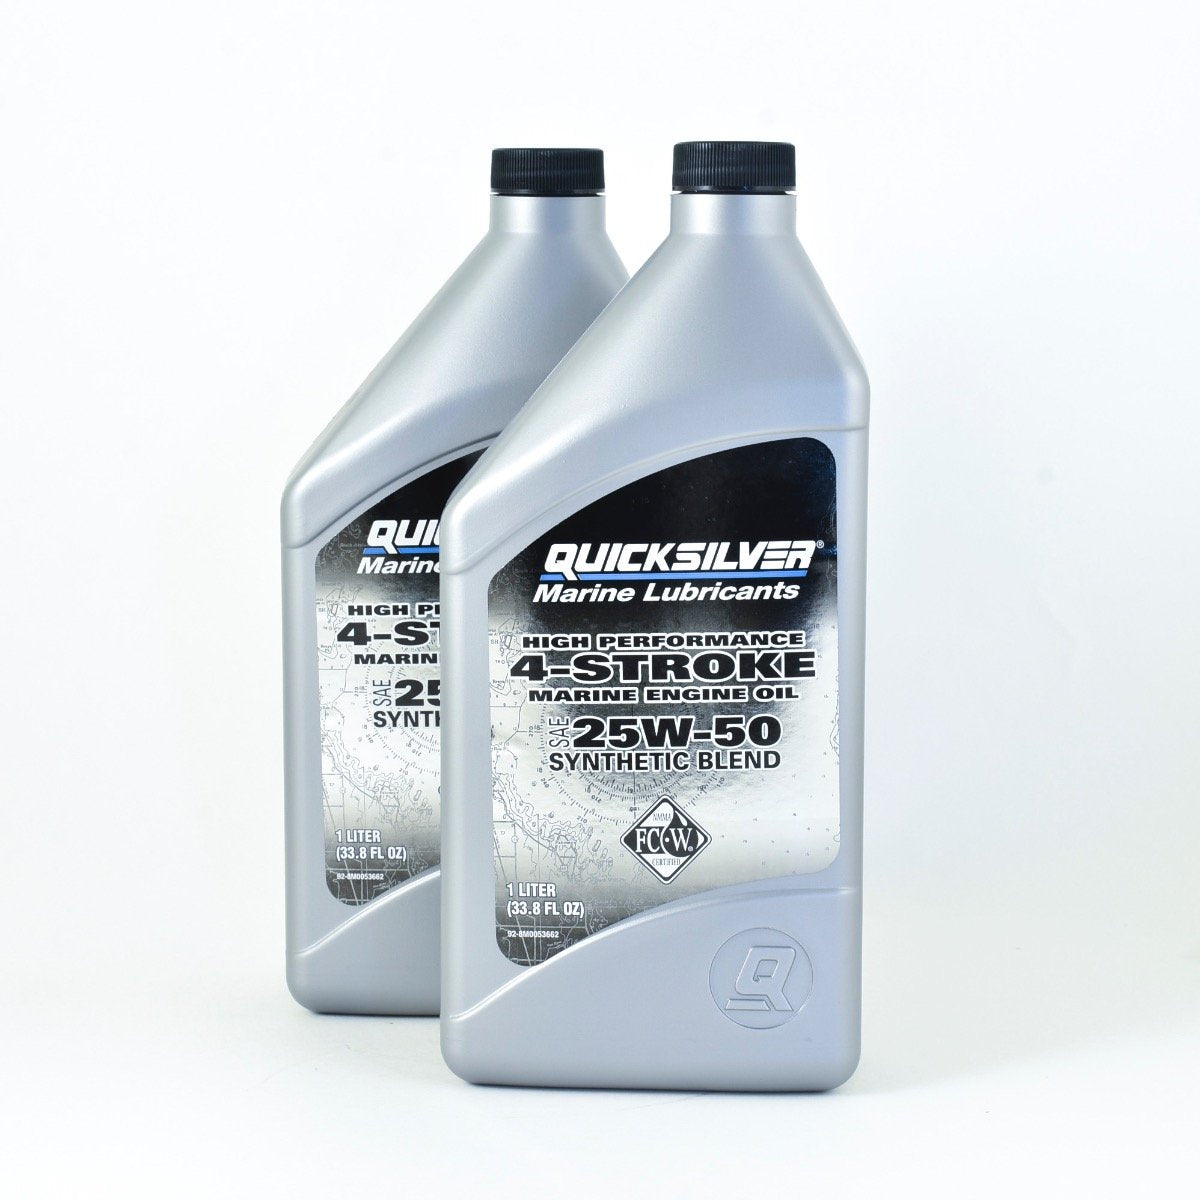 Quicksilver 4"‘Stroke Marine Engine Oil High Performance Synthetic Blend 25W50 - Quart - 92-8M0053662 - 2 Pack